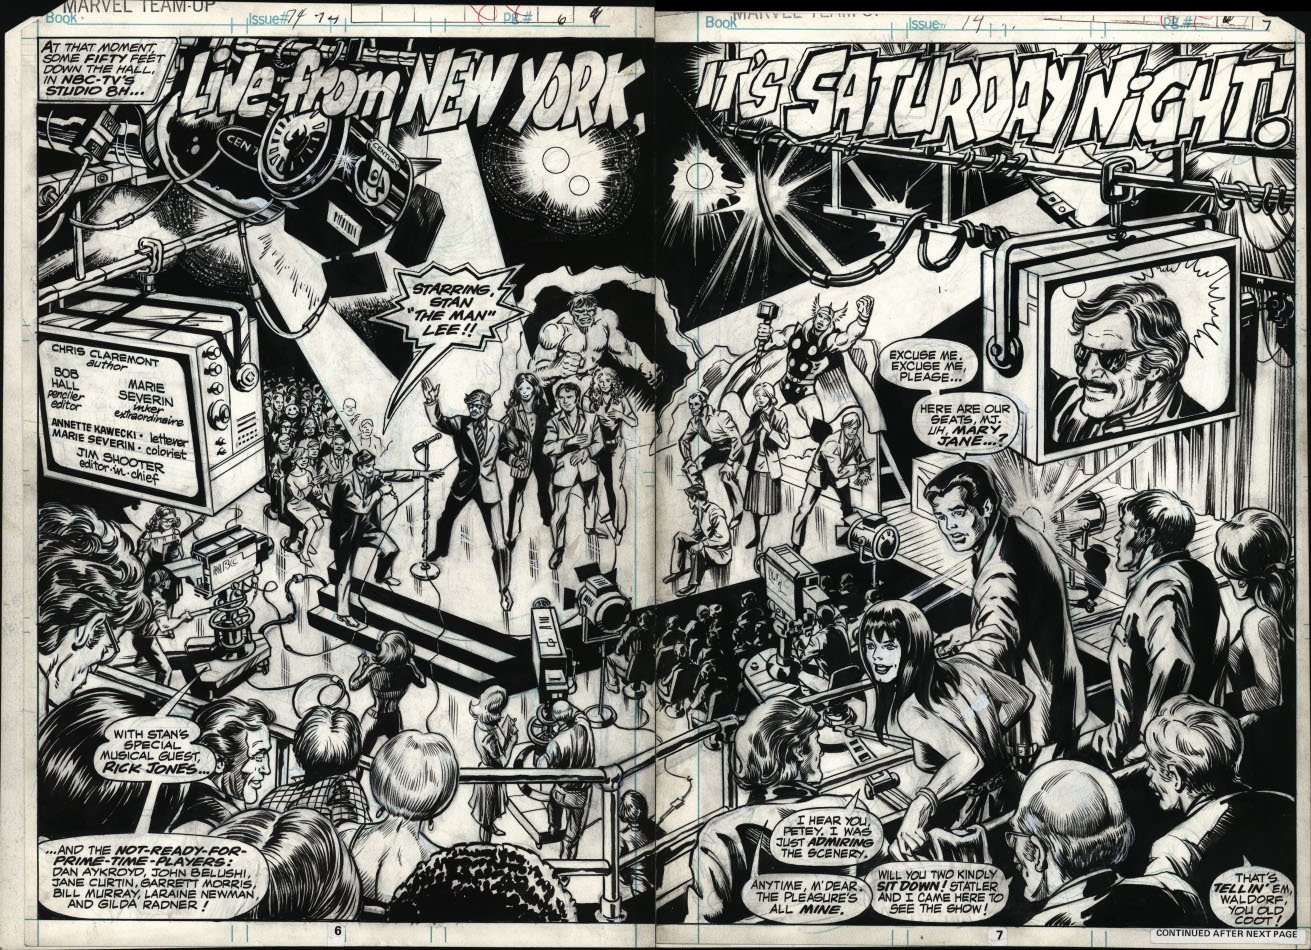 Drawn to Marvel – Newman Today